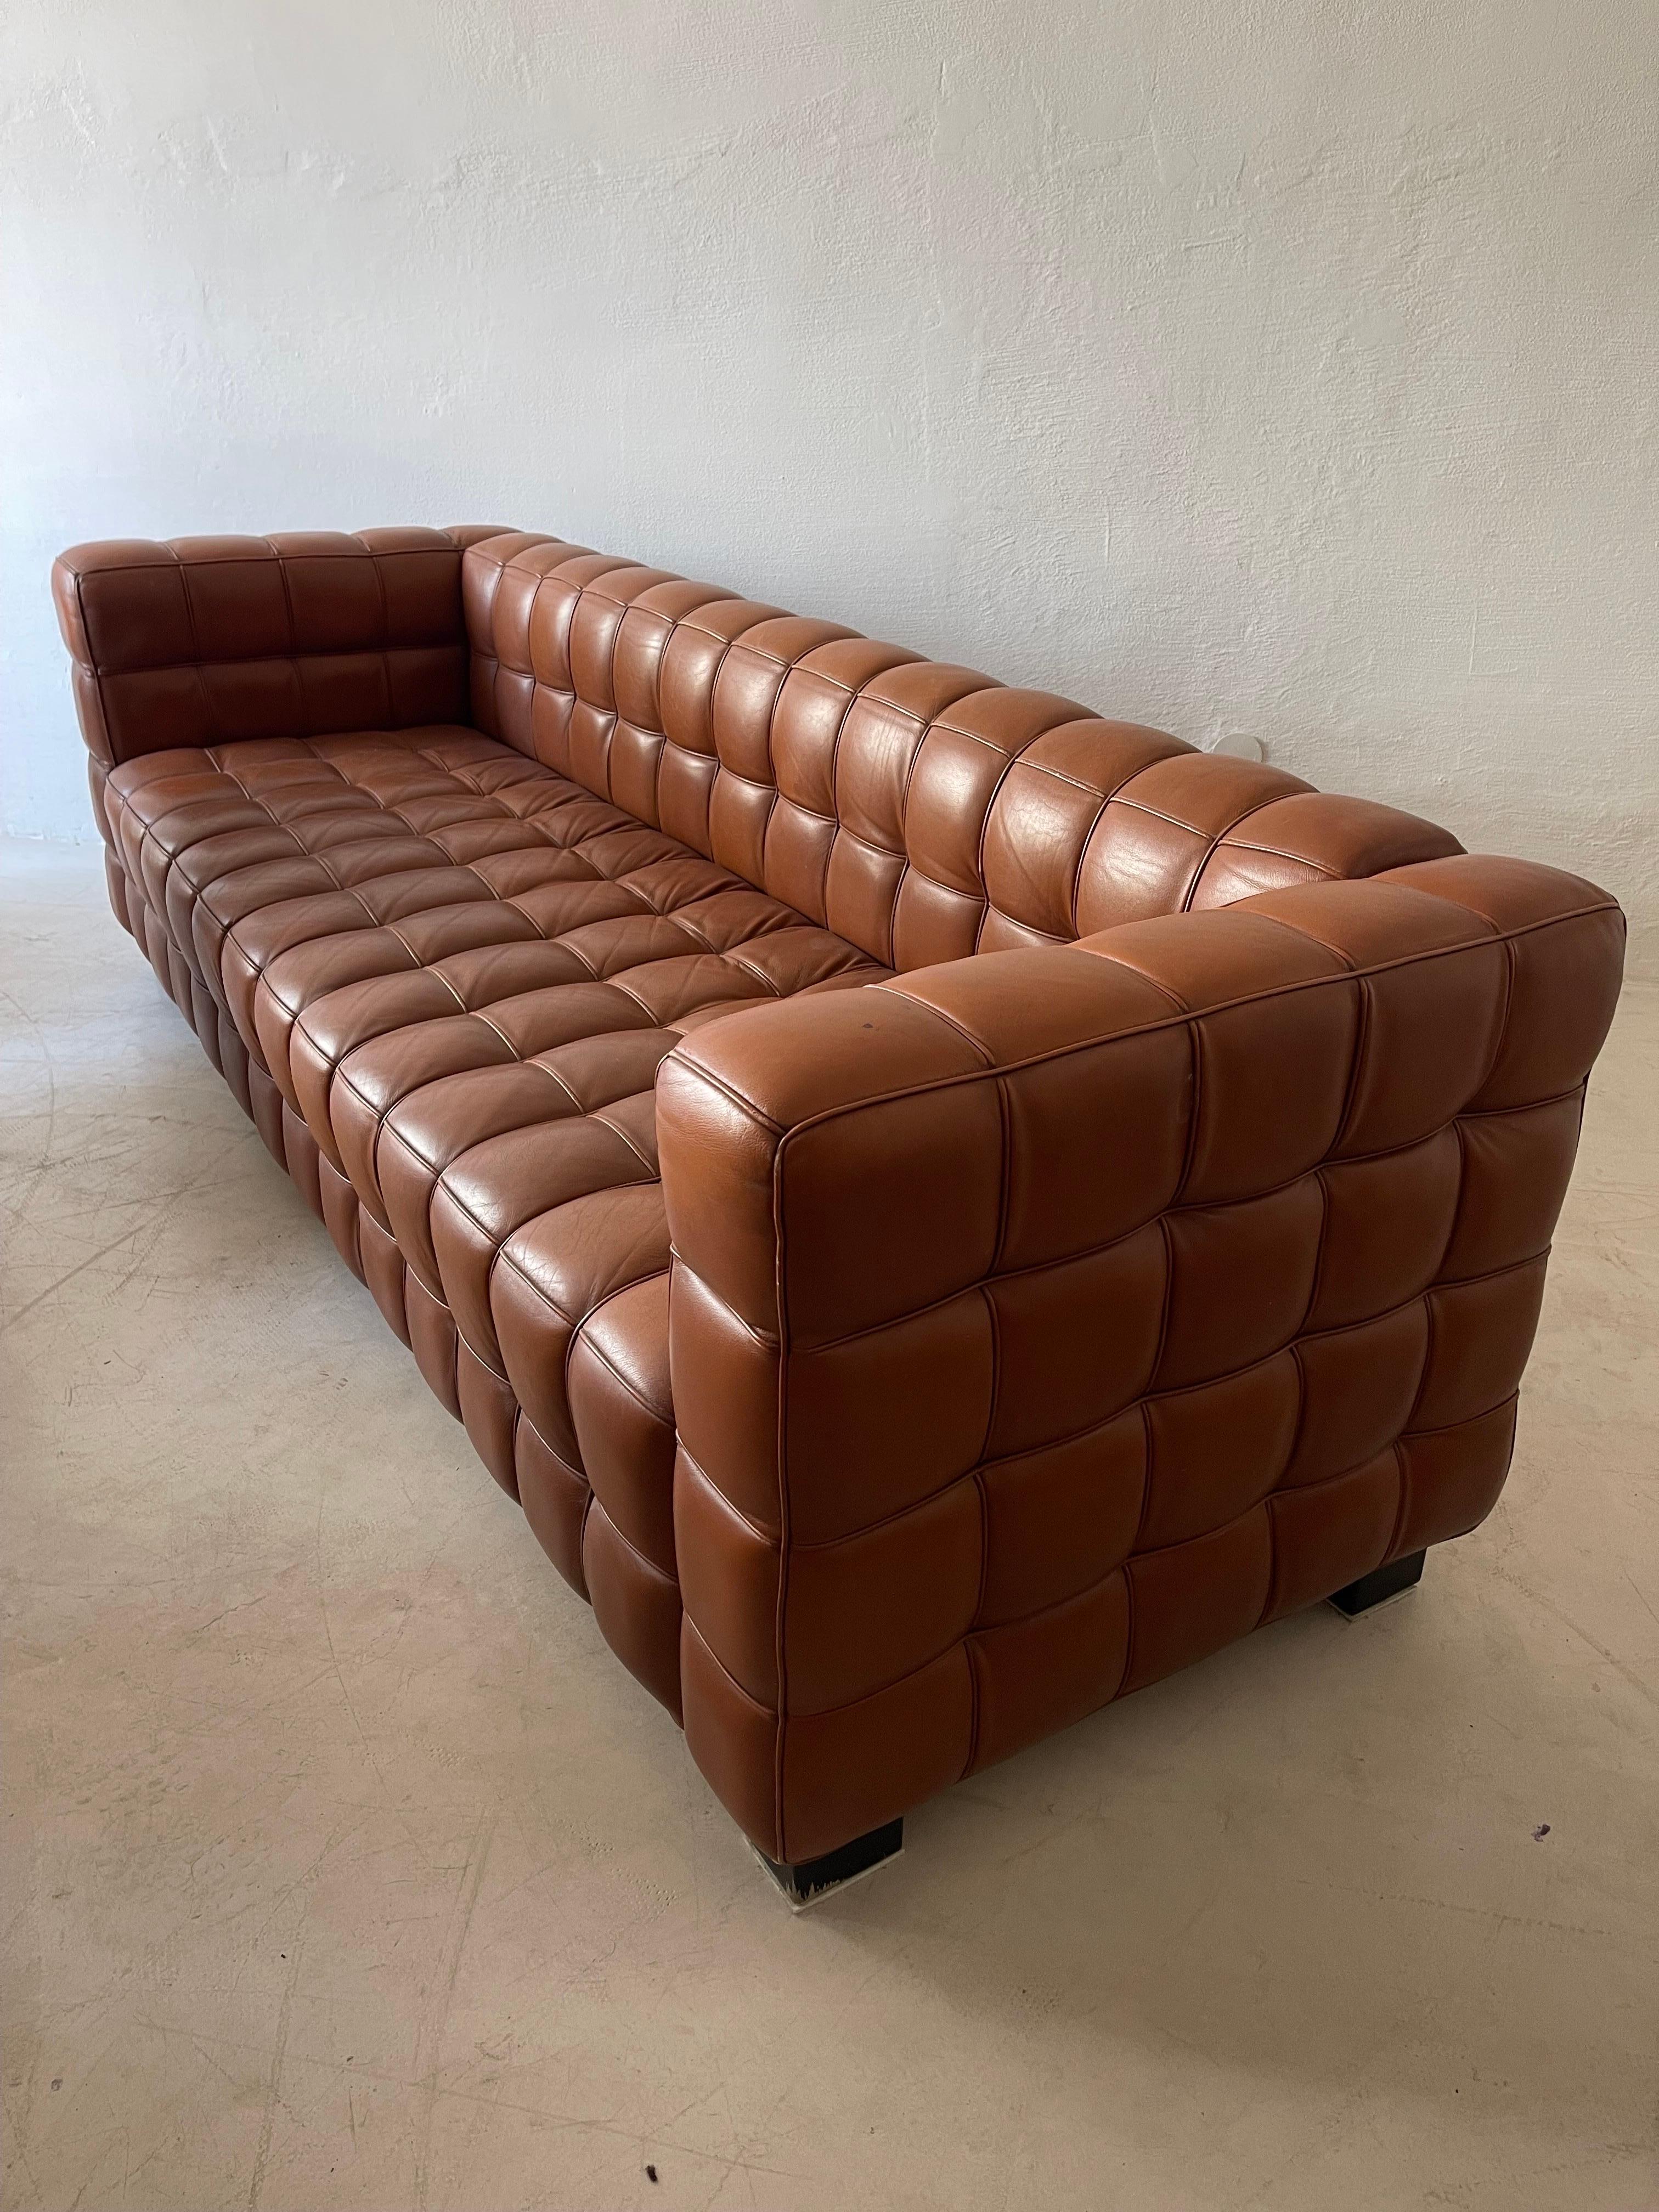 Late 20th Century Josef Hoffmann Kubus Sofa in patinated Original Leather by Wittmann, Set of Two  For Sale